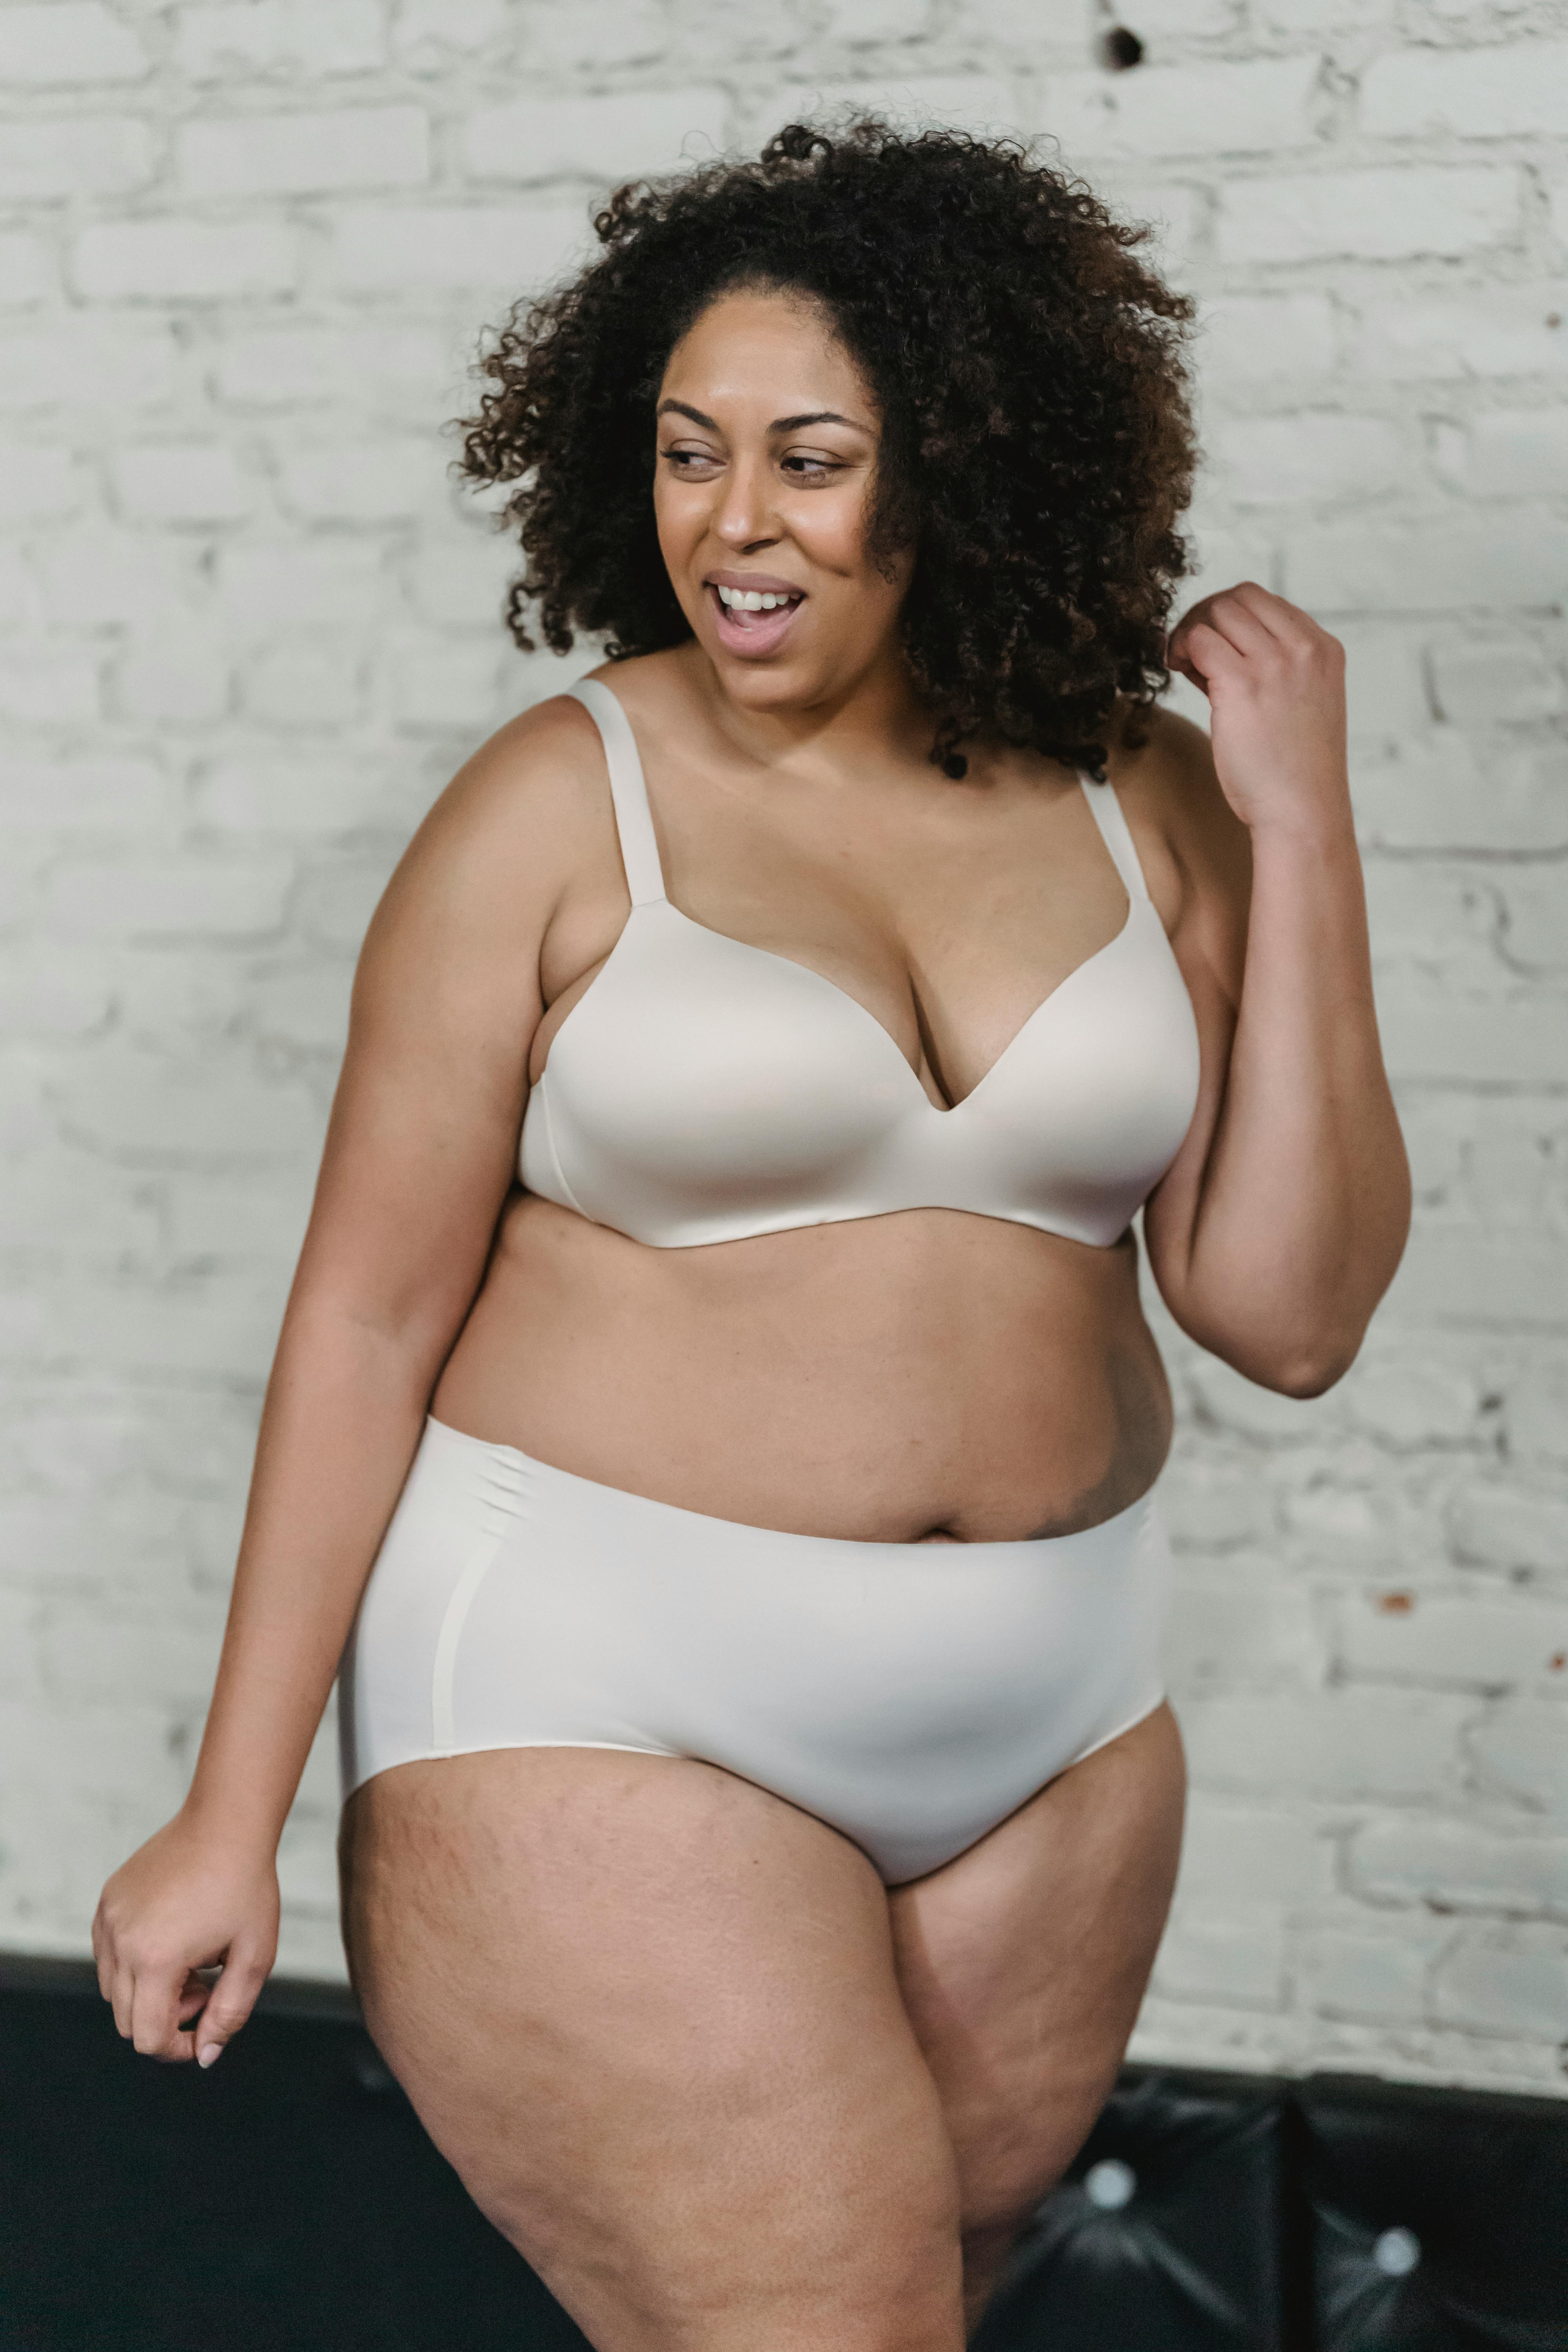 Overweight ethnic woman in lingerie in studio - a Royalty Free